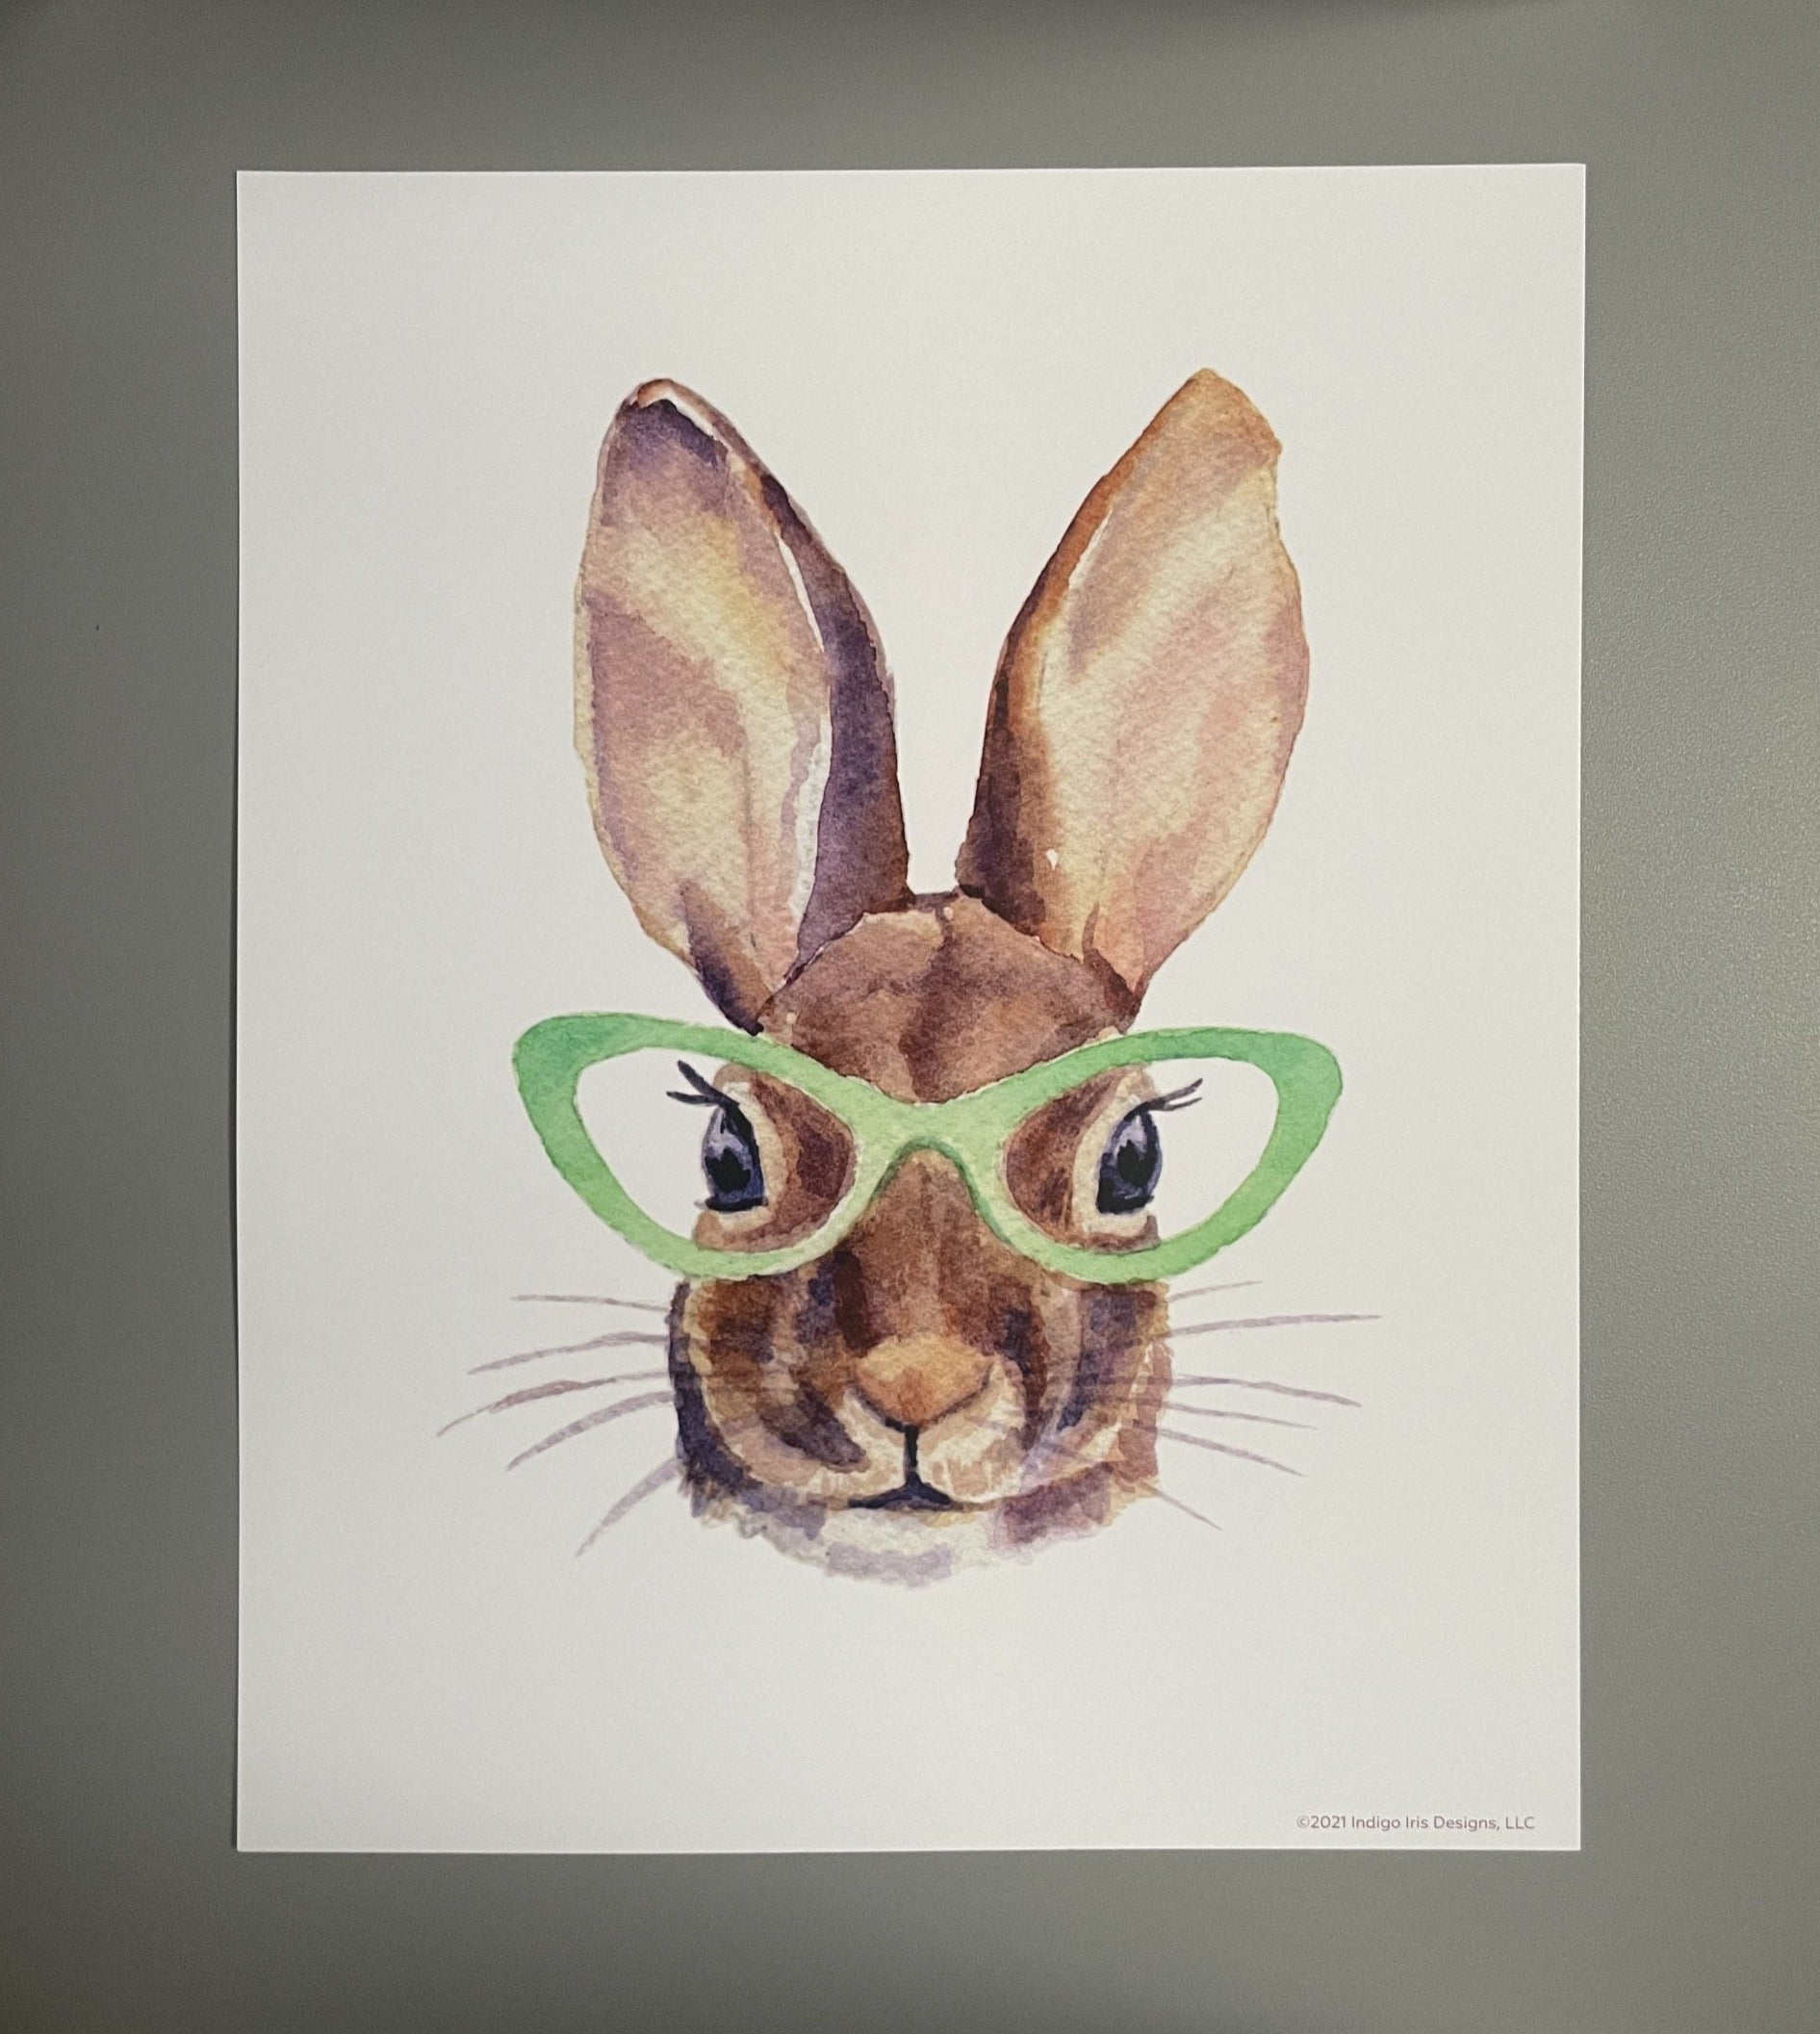 Print of a bunny wearing green glasses